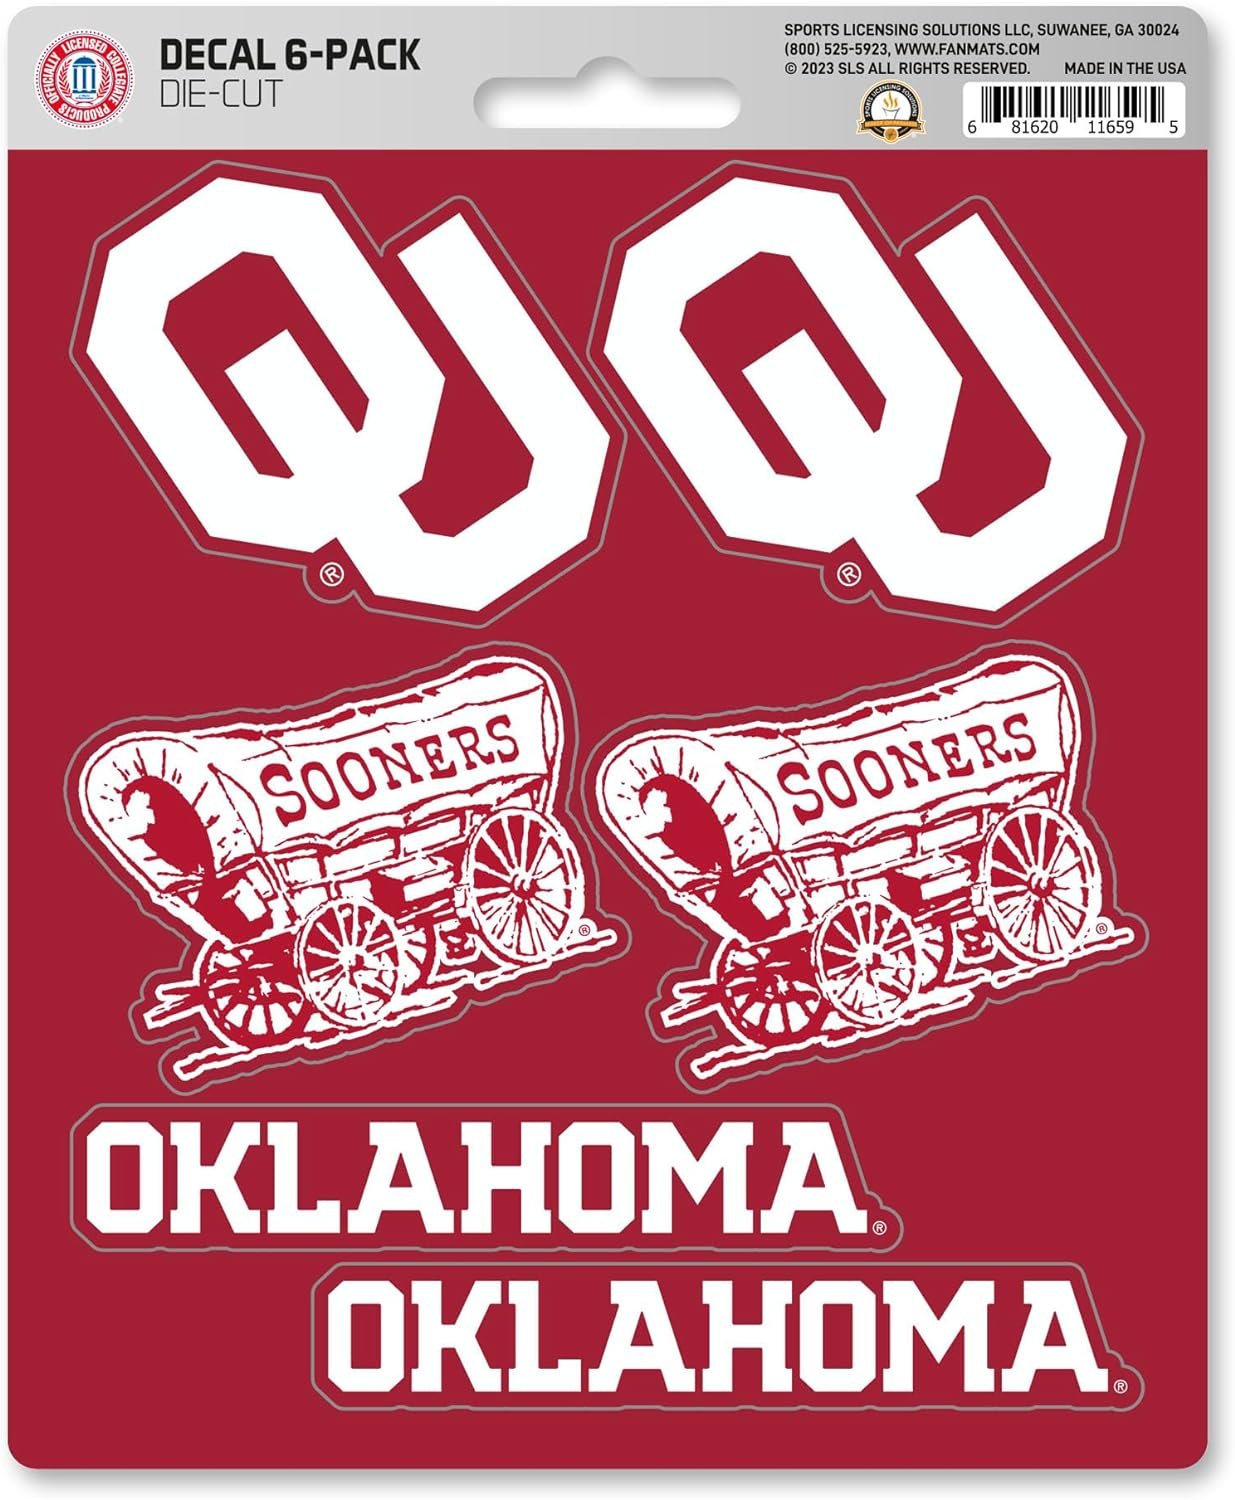 University of Oklahoma Sooners 6-Piece Decal Sticker Set, 5x6 Inch Sheet, Gift for football fans for any hard surfaces around home, automotive, personal items